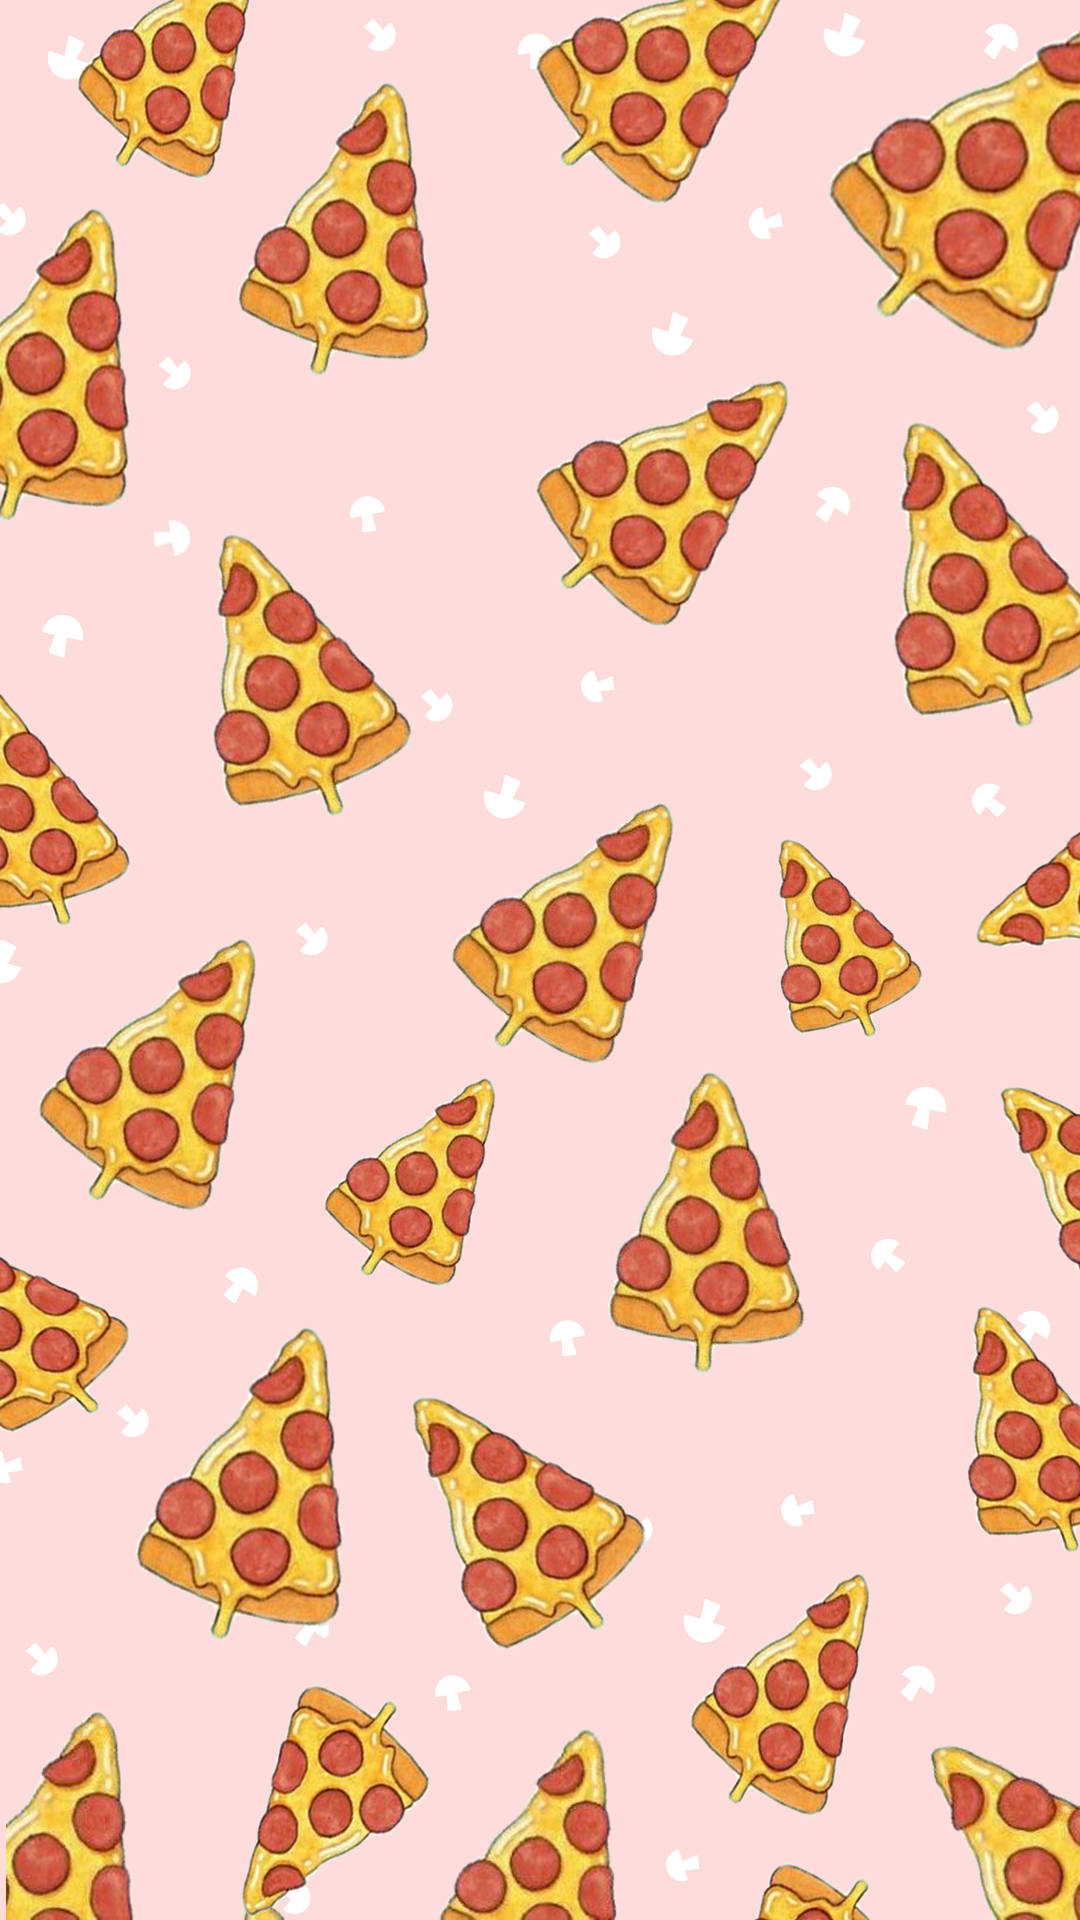 Pepperoni Pizza In Pink Background